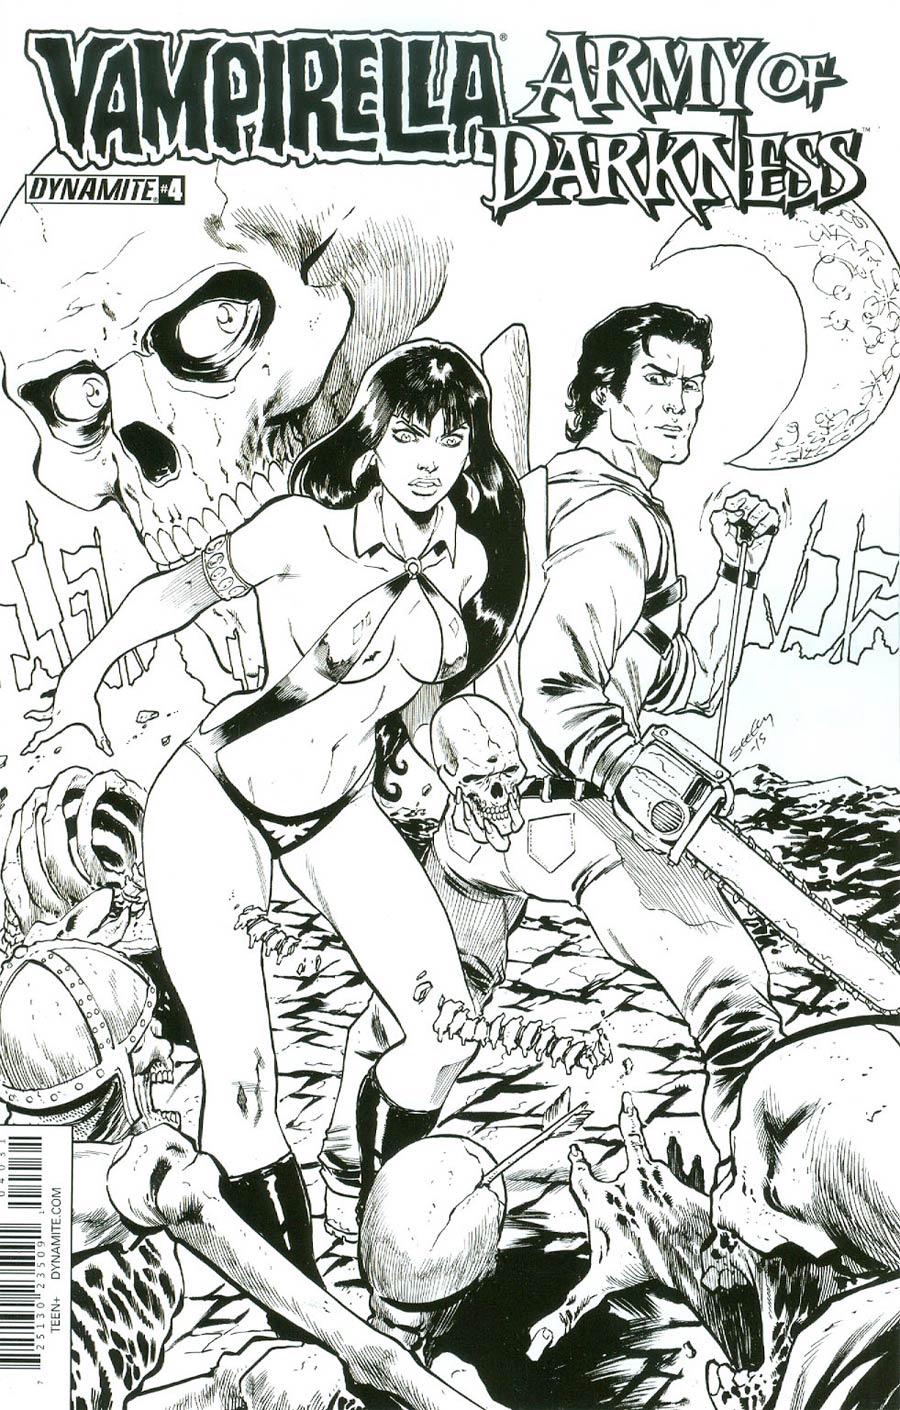 Vampirella Army Of Darkness #4 Cover C Incentive Tim Seeley Black & White Cover